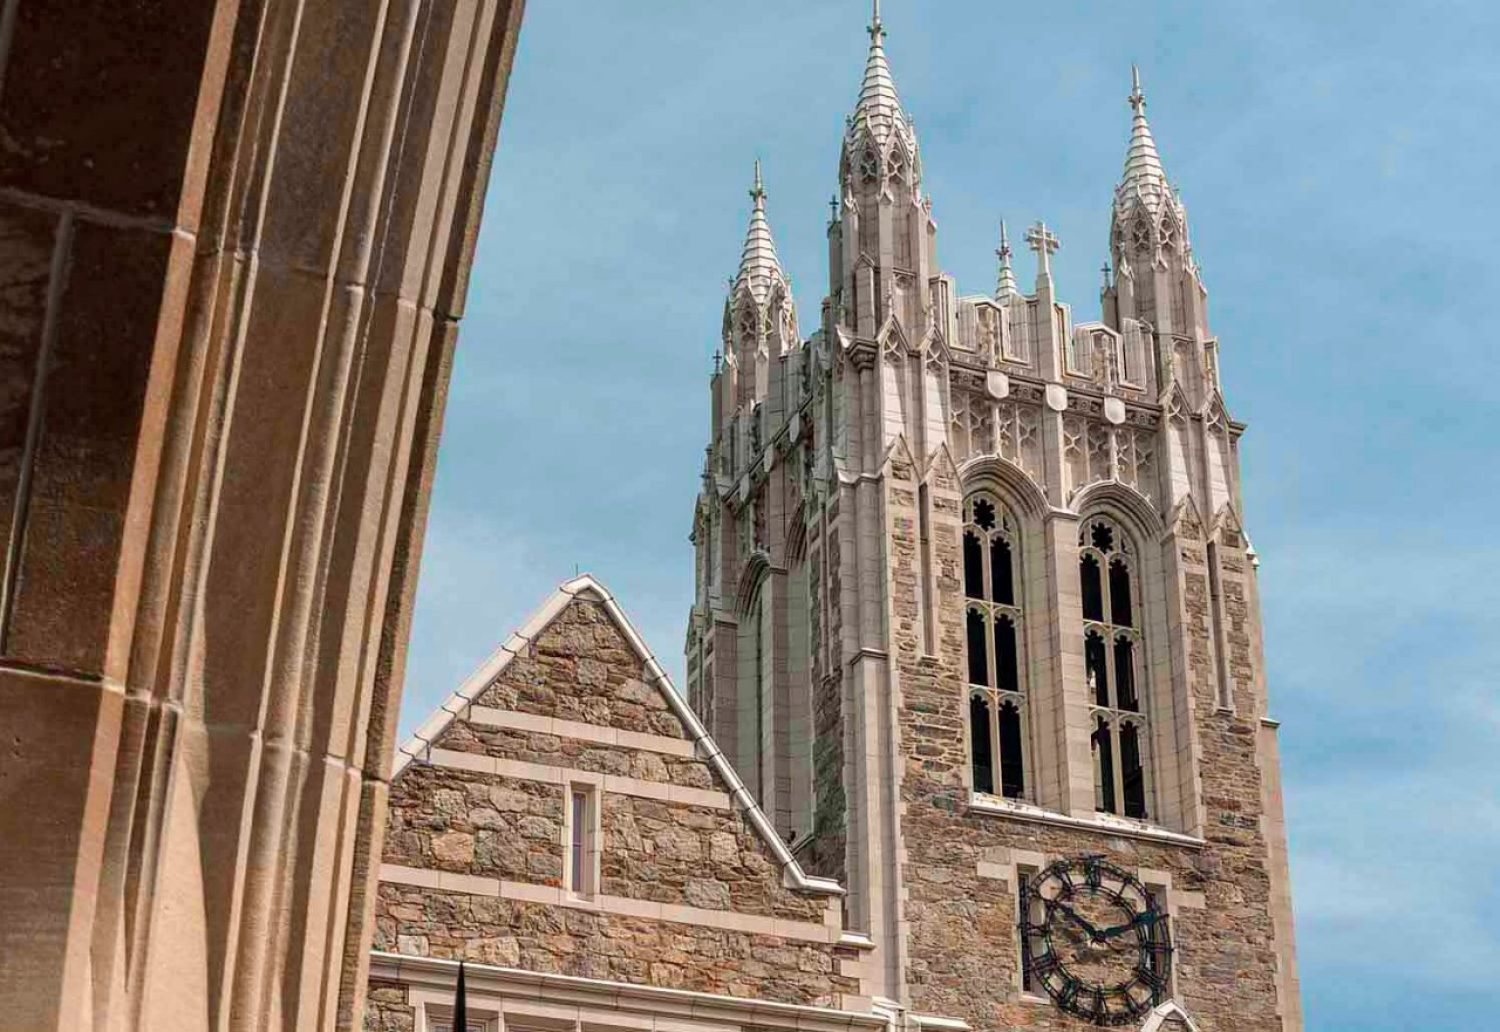 Gasson tower